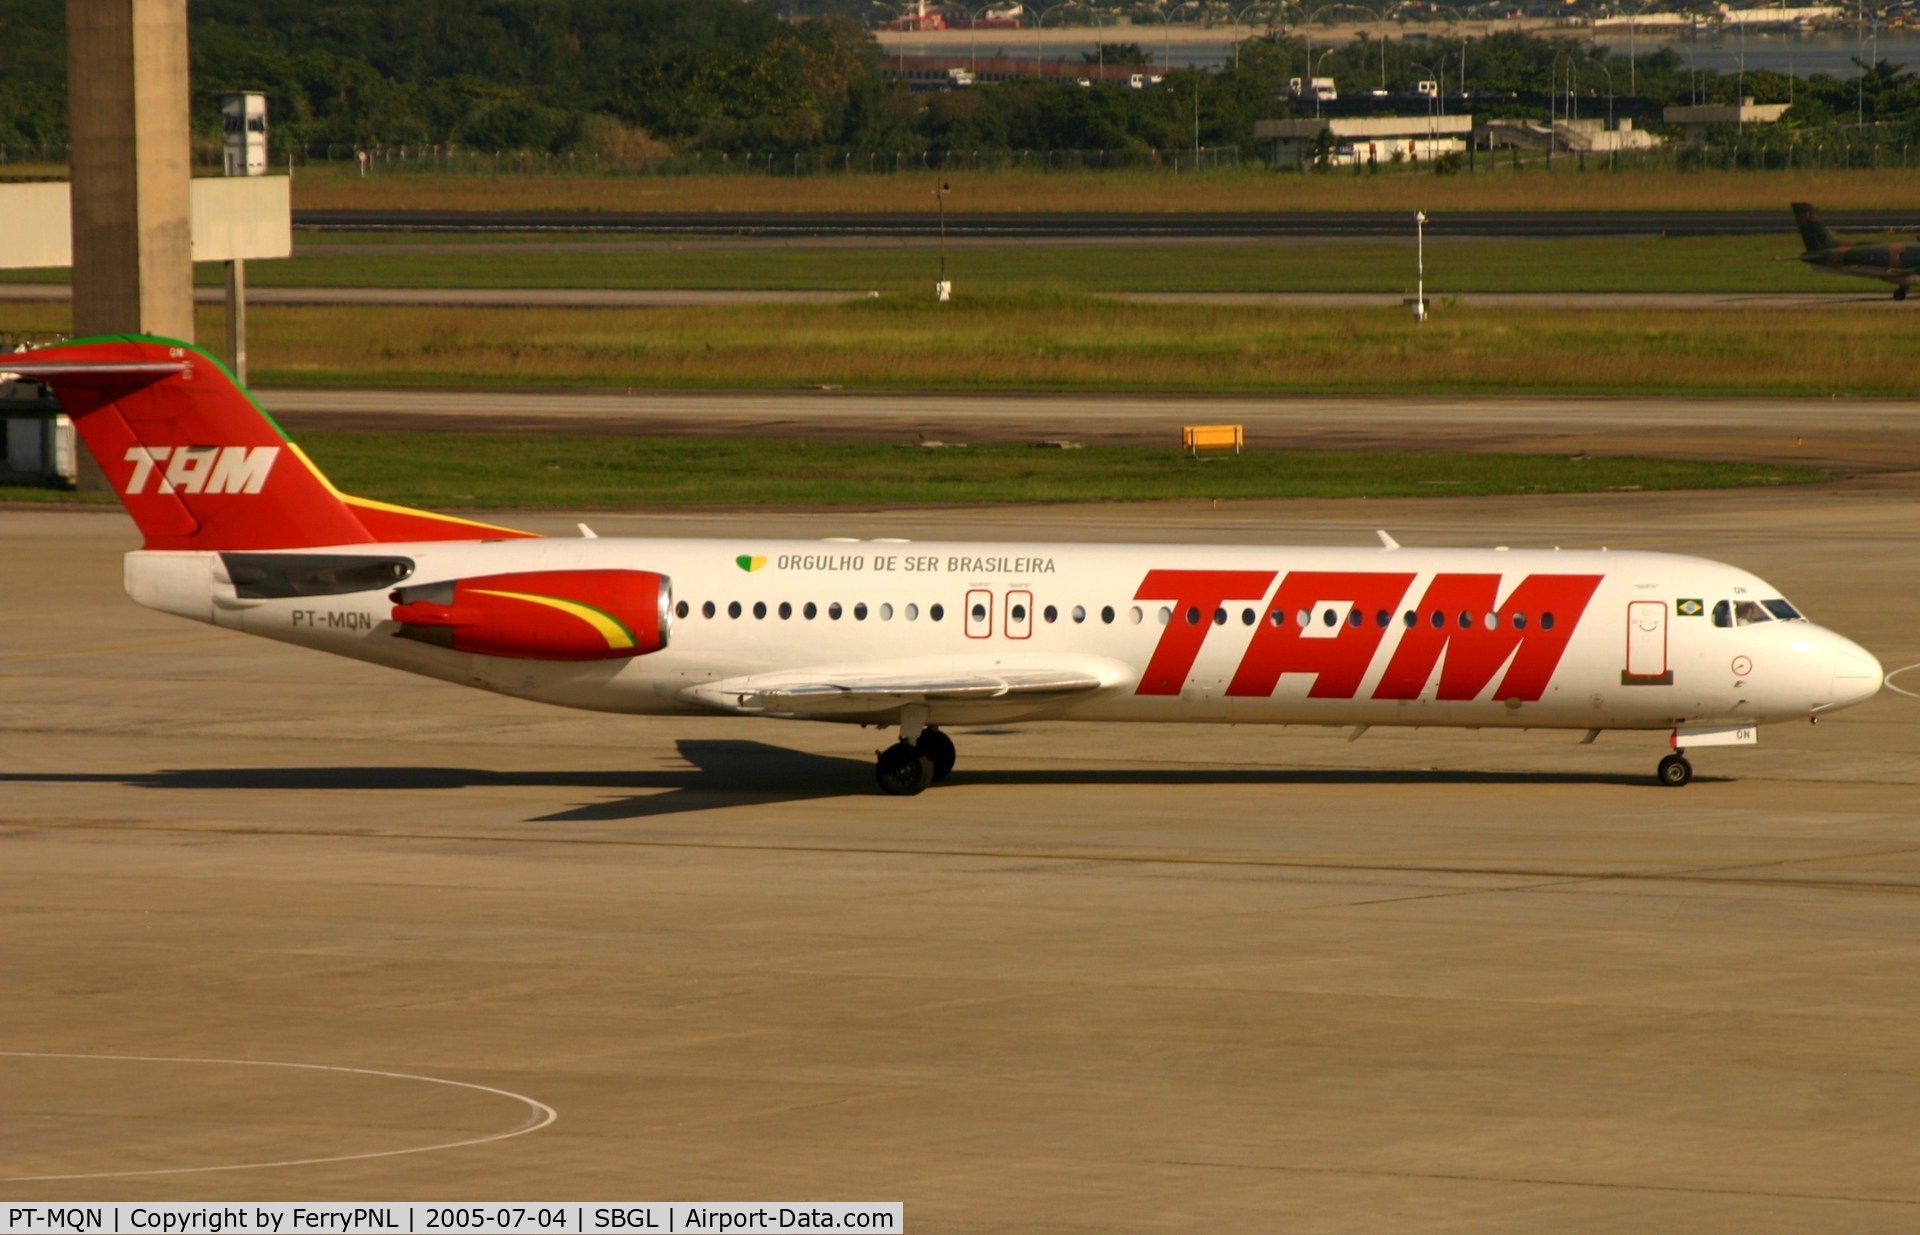 PT-MQN, 1992 Fokker 100  (F-28-0100) C/N 11409, TAM Fk100 taxiing out to depart GIG